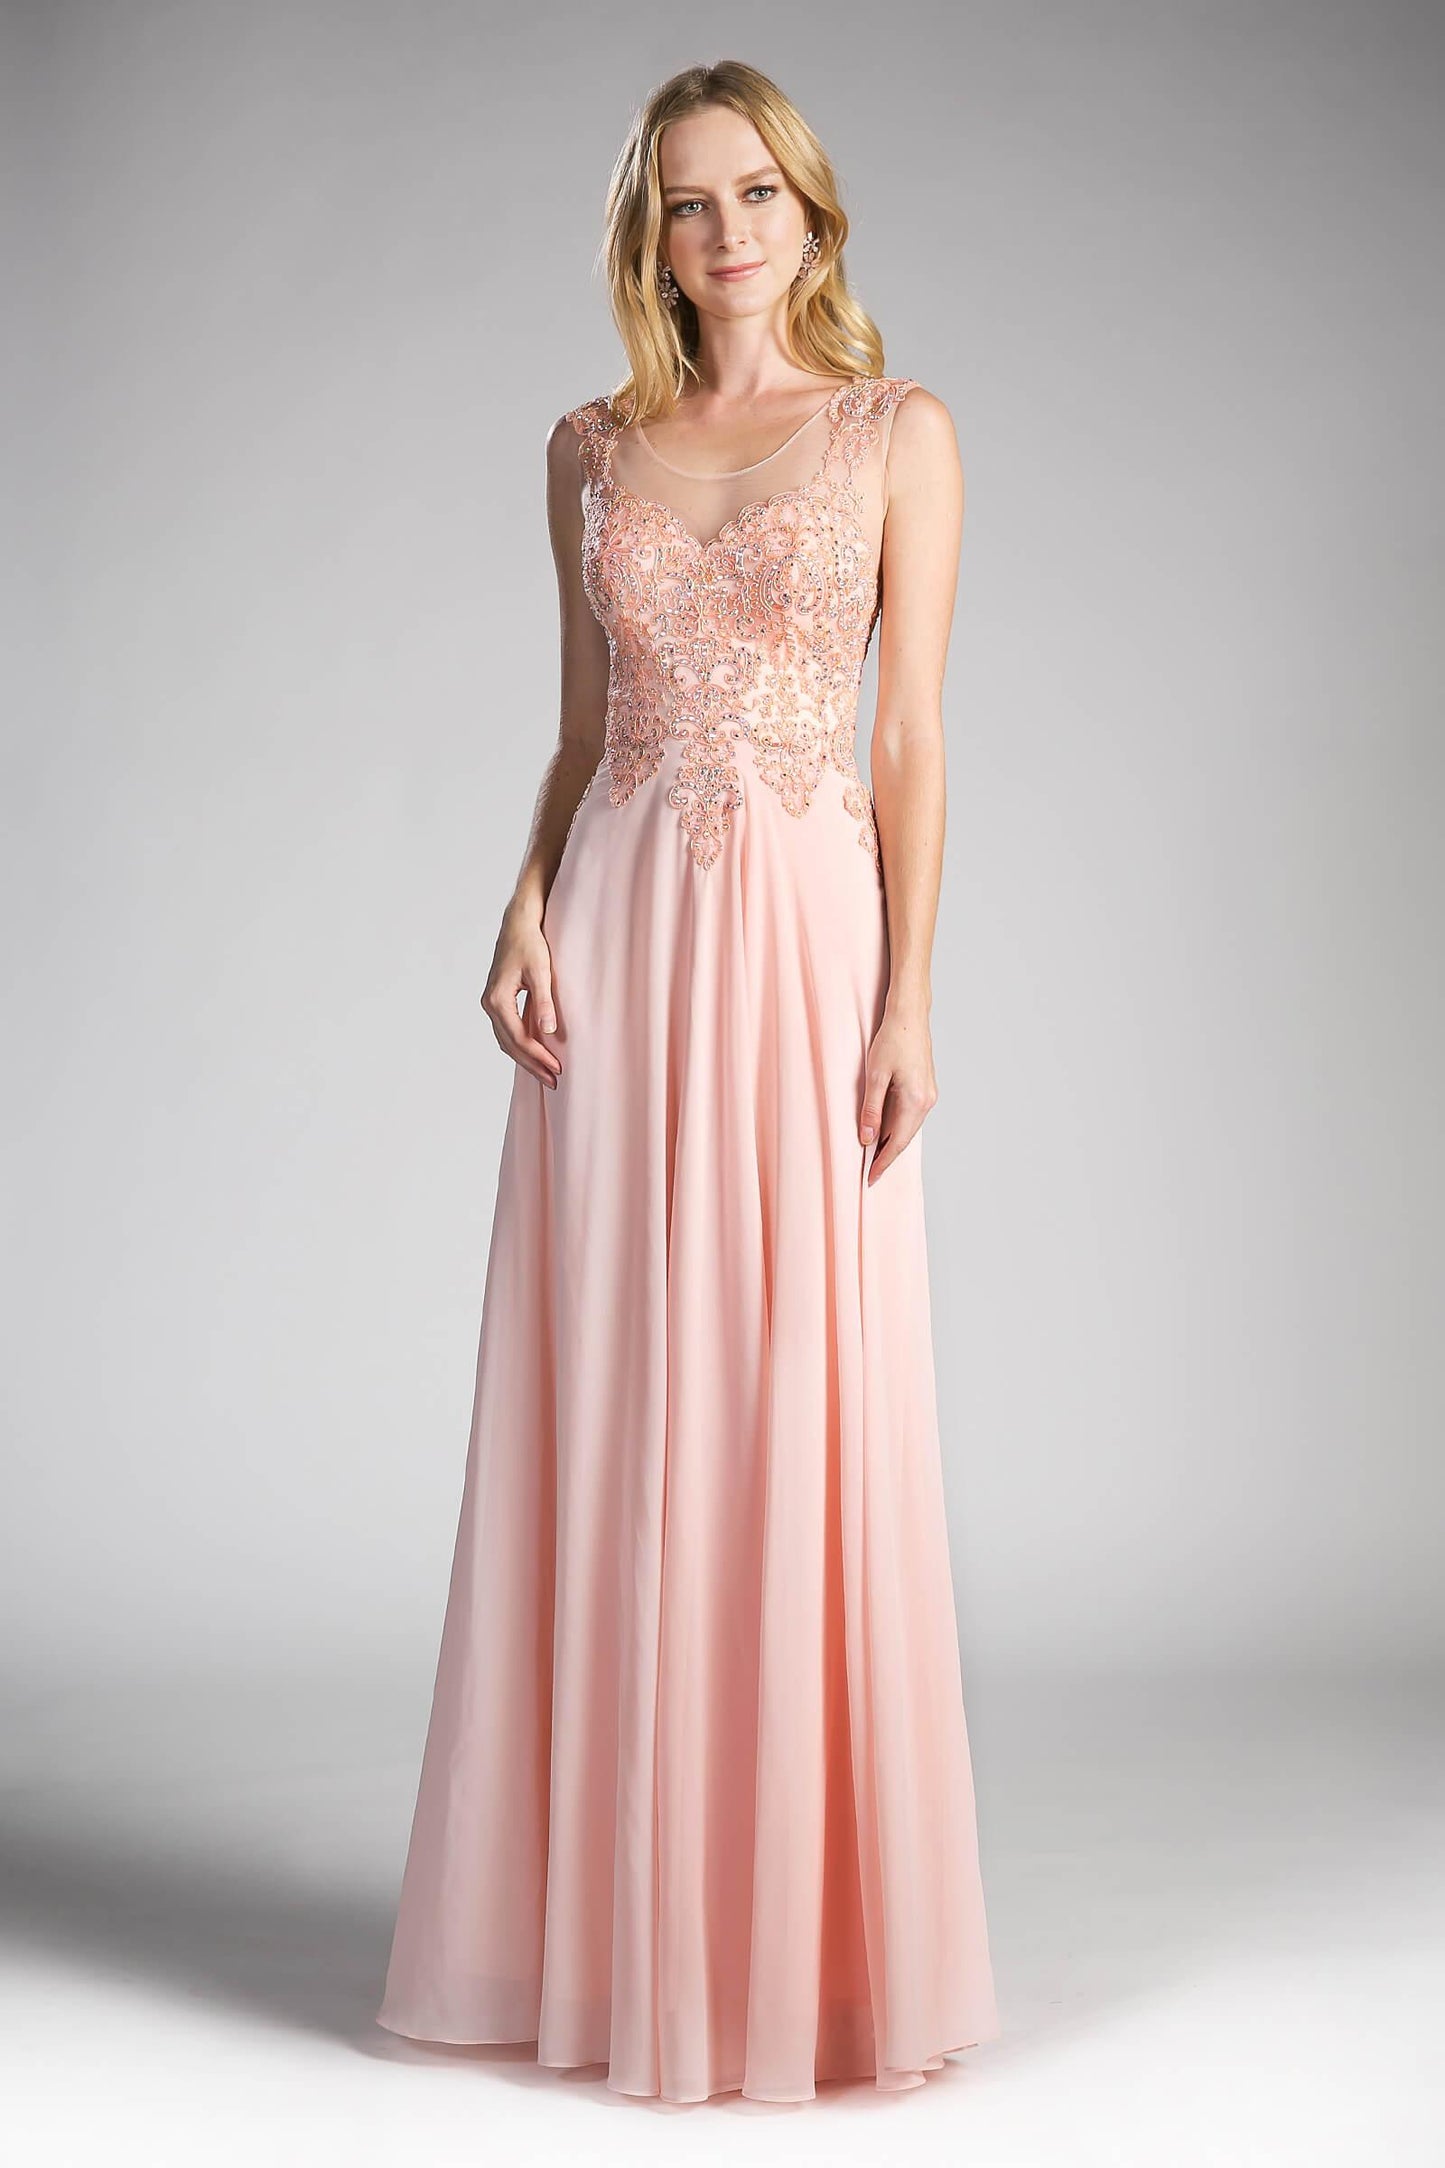 Long Jewel Embellished Formal Prom Gown Peach